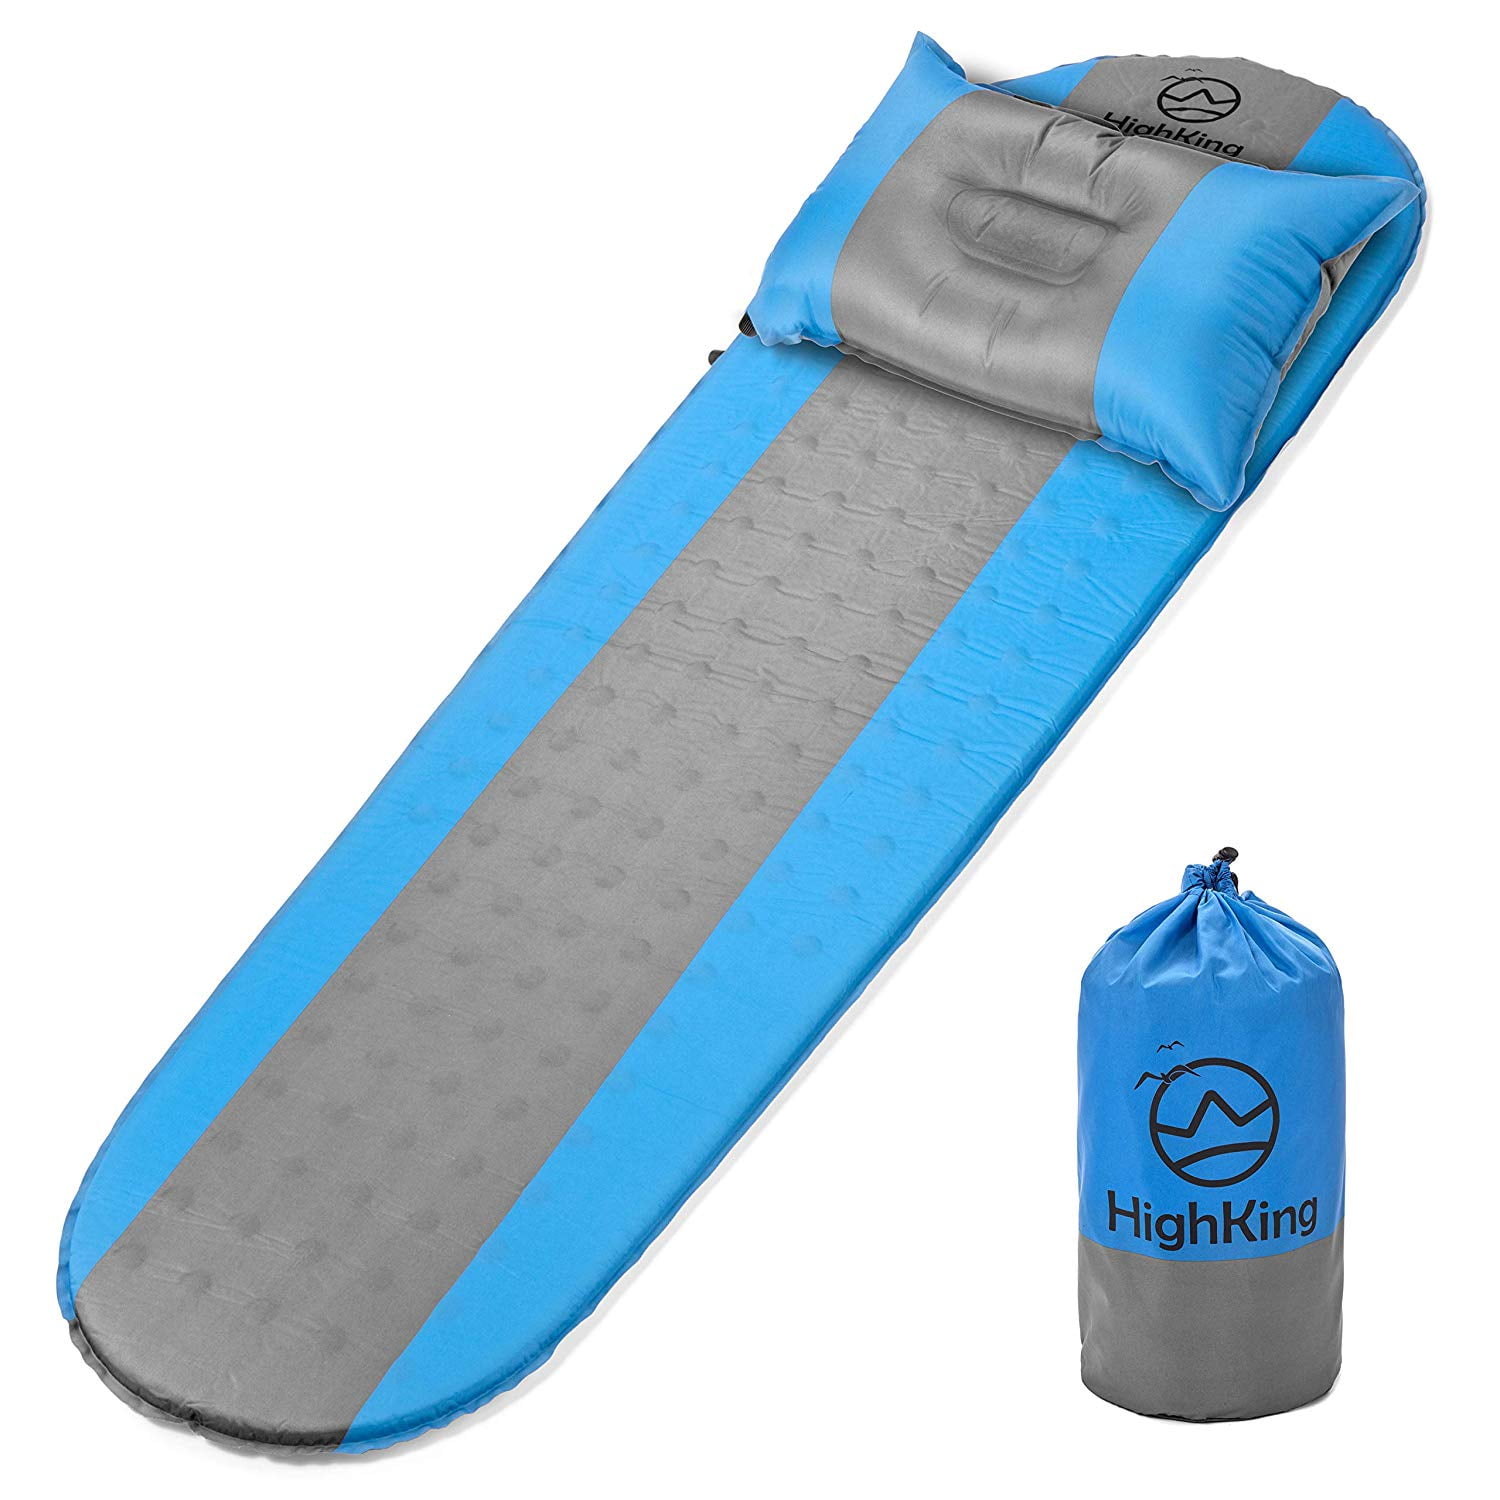 Blue/Grey 22 Wide Lightweight Folding Camping Pad for Hiking Backpacking REDCAMP Closed Cell Foam Camping Sleeping Pad 72x22x0.75 